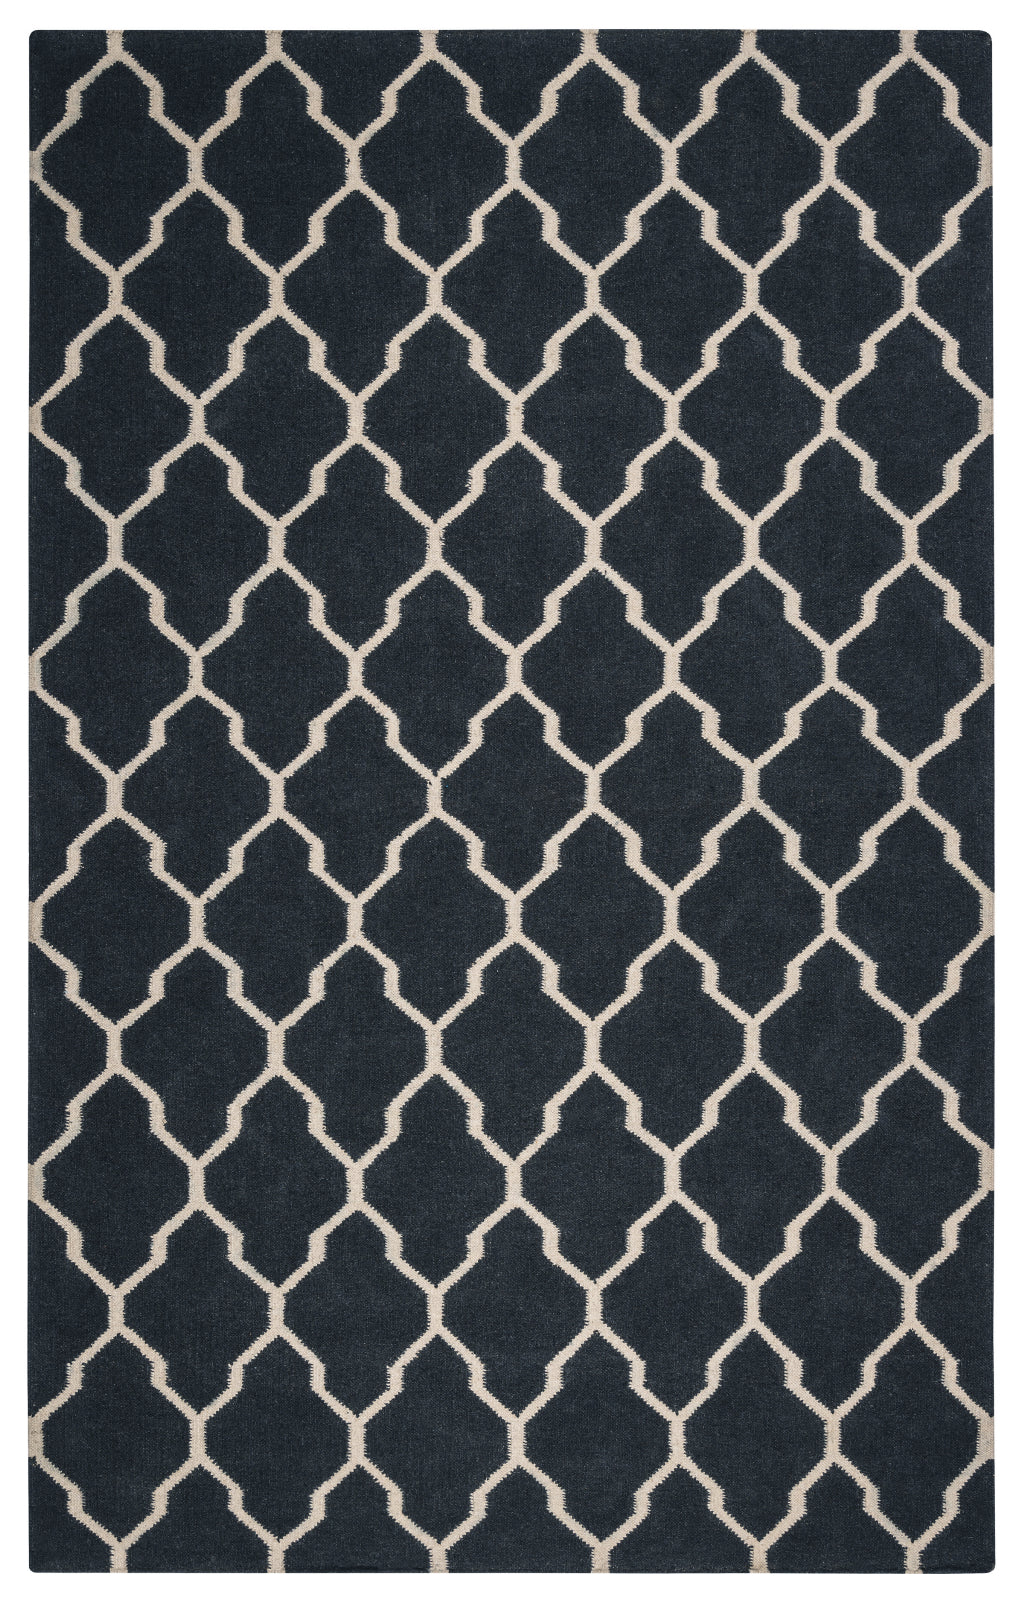 Rizzy Swing SG3042 gray/charcoal Area Rug main image